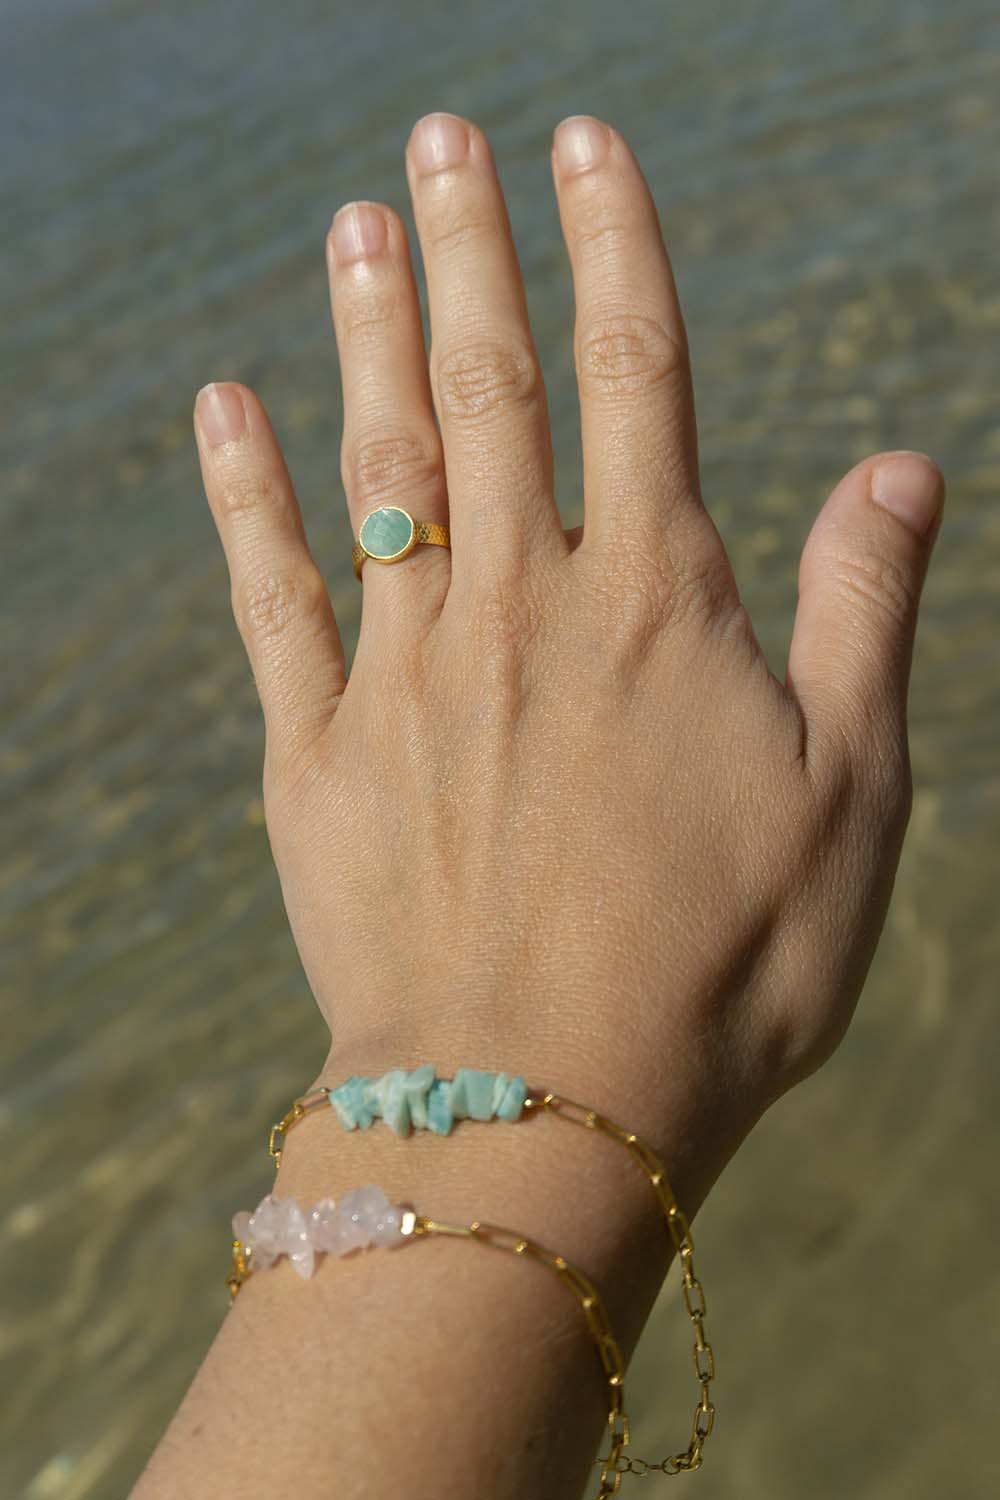 Cascais Amazonite Natural Stone Ring in 925 Silver and 18k Gold Plated